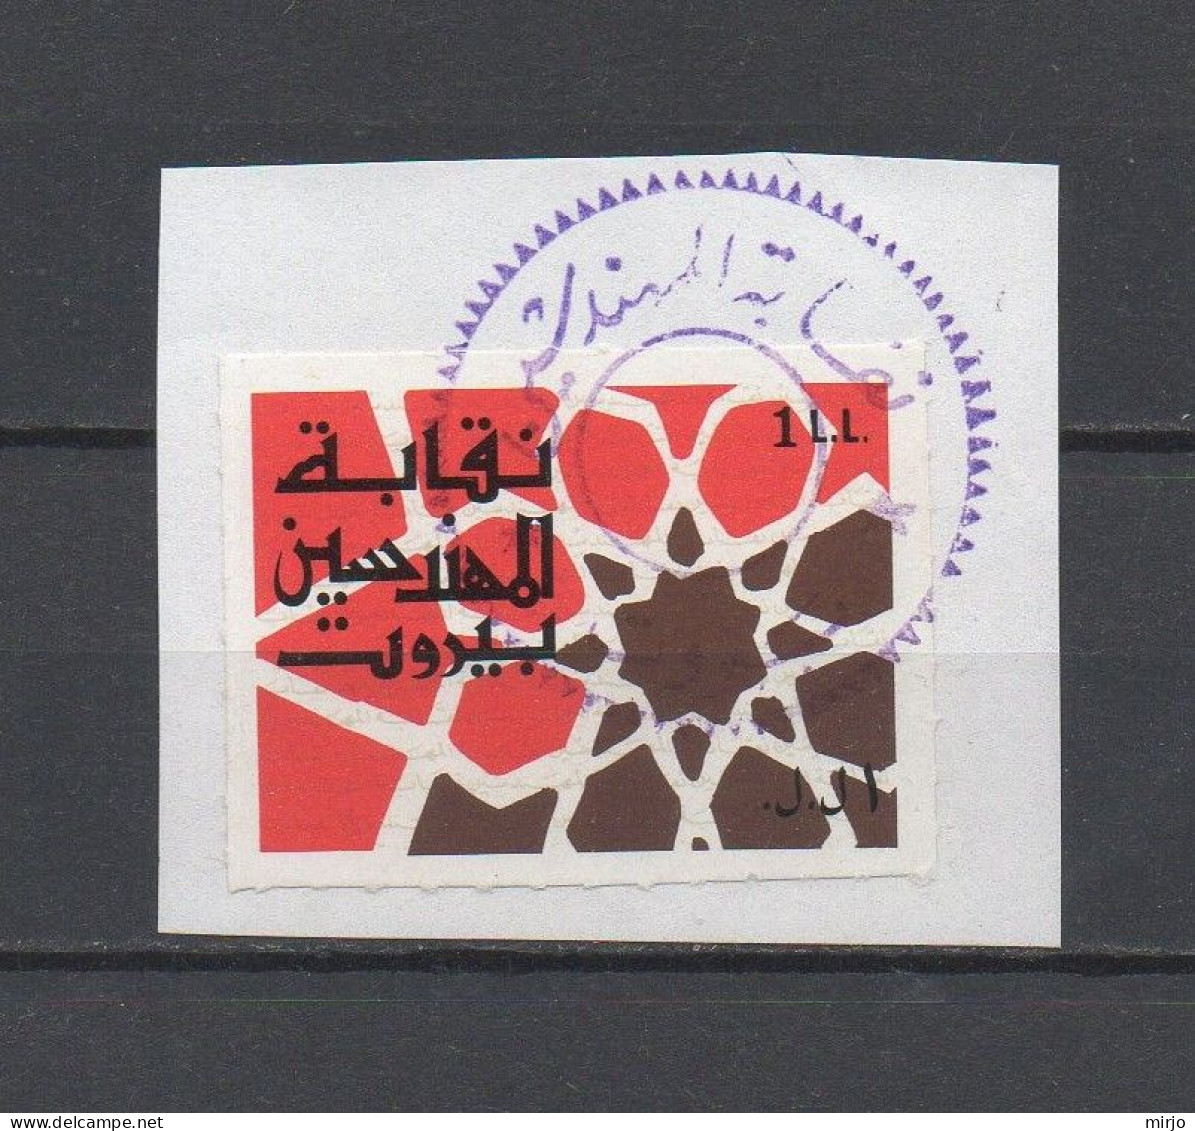 Lebanon Architect Syndicate WITHOUT PERFORATION RARE 1LL Used Revenue Stamp Liban Libano - Liban